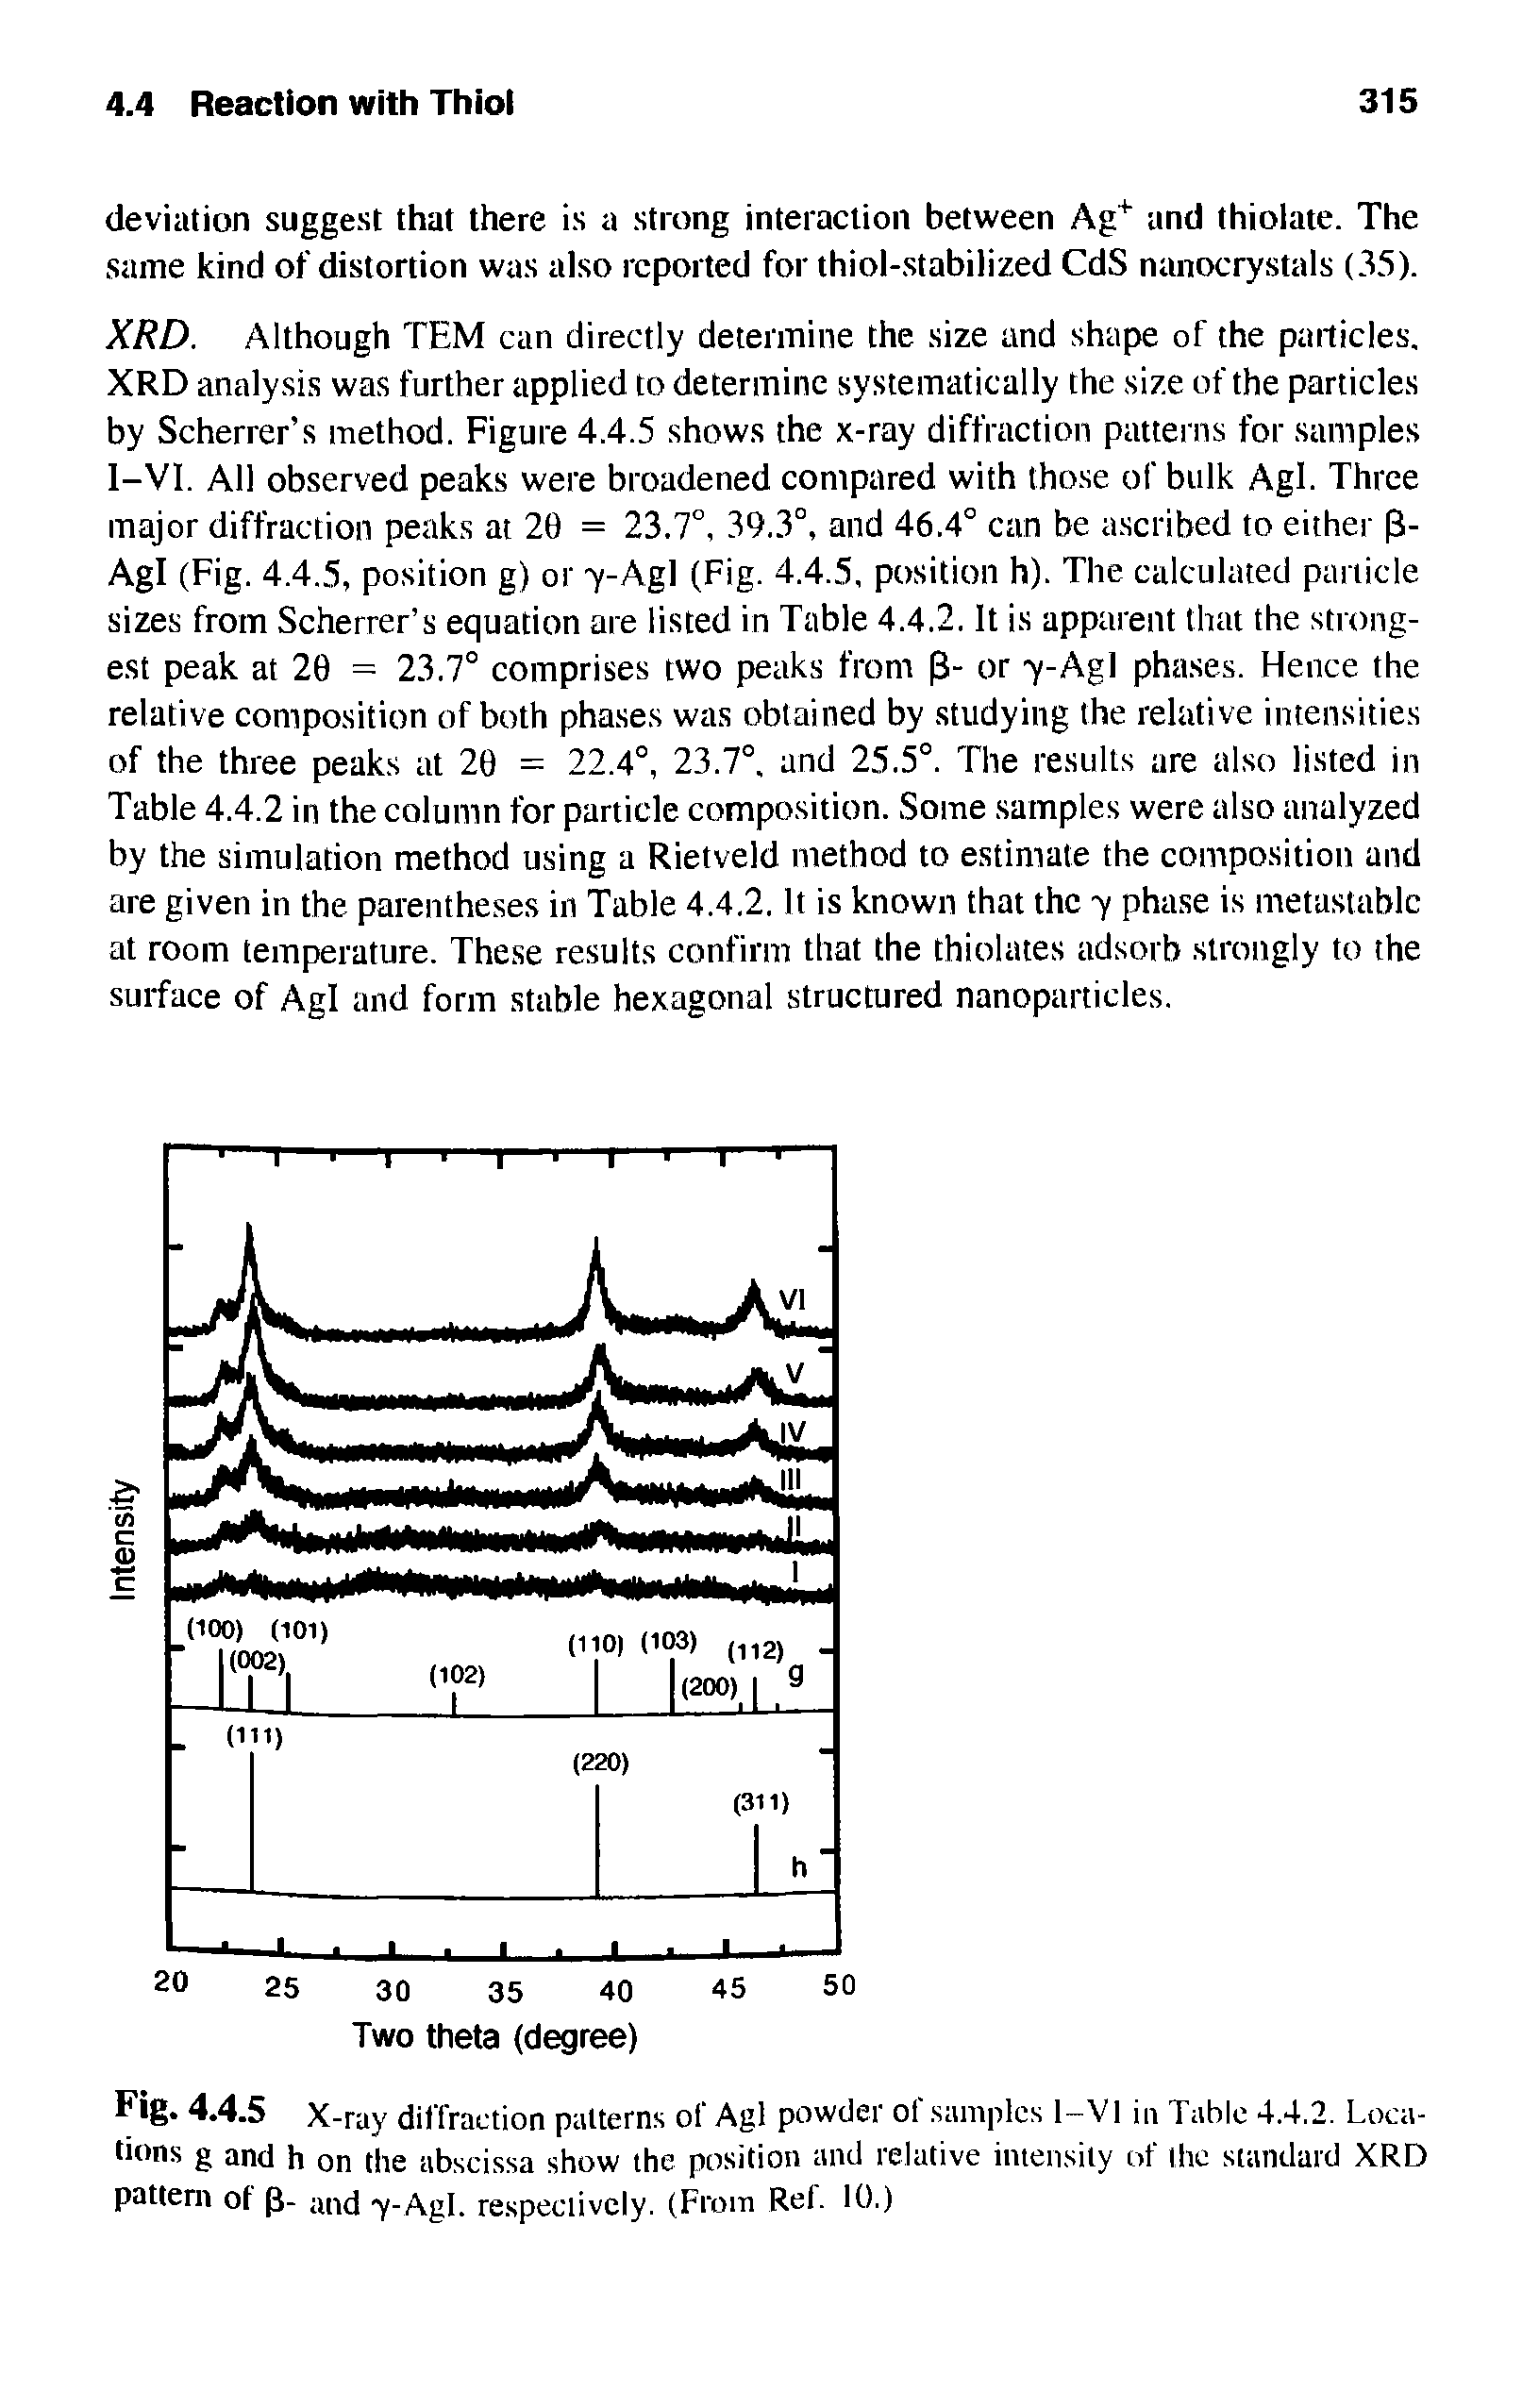 Fig. 4.4.5 X-ray diffraction patterns of Agl powder ot samples 1-V1 in Table 4.4.2. Locations g and h on the abscissa show the position and relative intensity of the standard XRD pattern of ( - and y-Agl. respectively. (From Rel. 10.)...